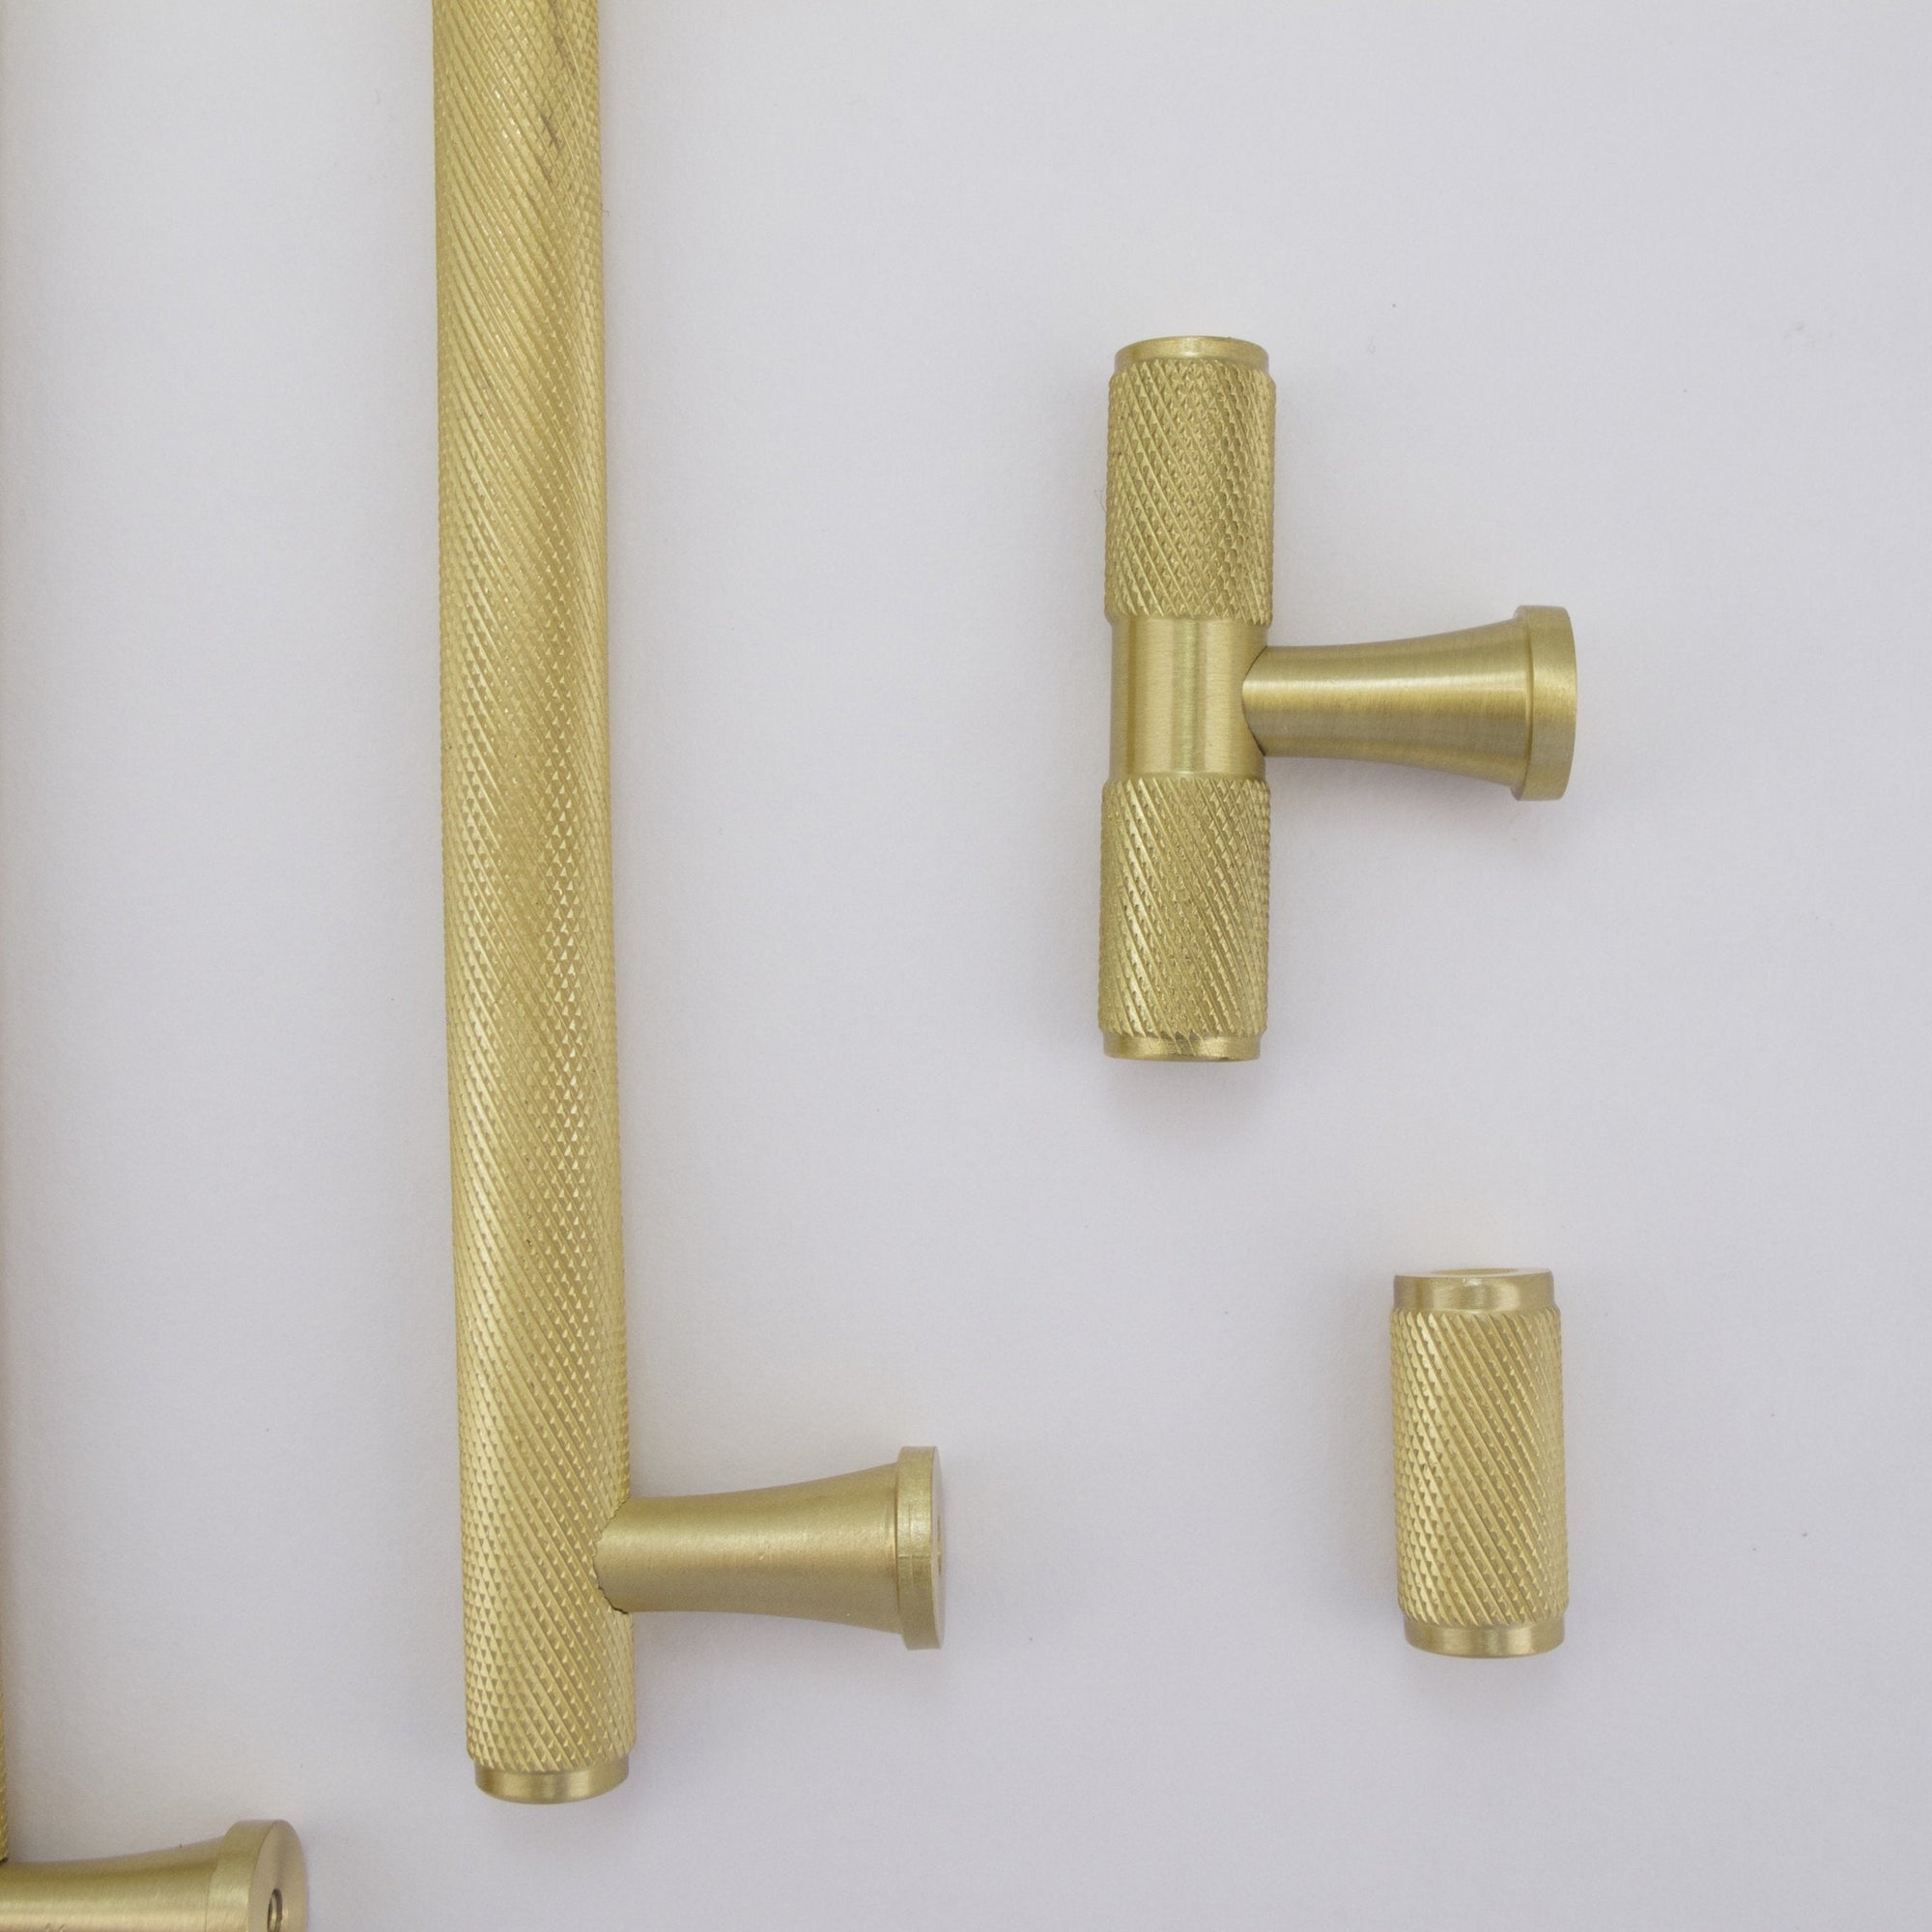 Knurled Texture Solid Brass Hardware Cabinet T-Bar Pull Handles - Round Bar  Series - Brushed Brass (3 Pull) 